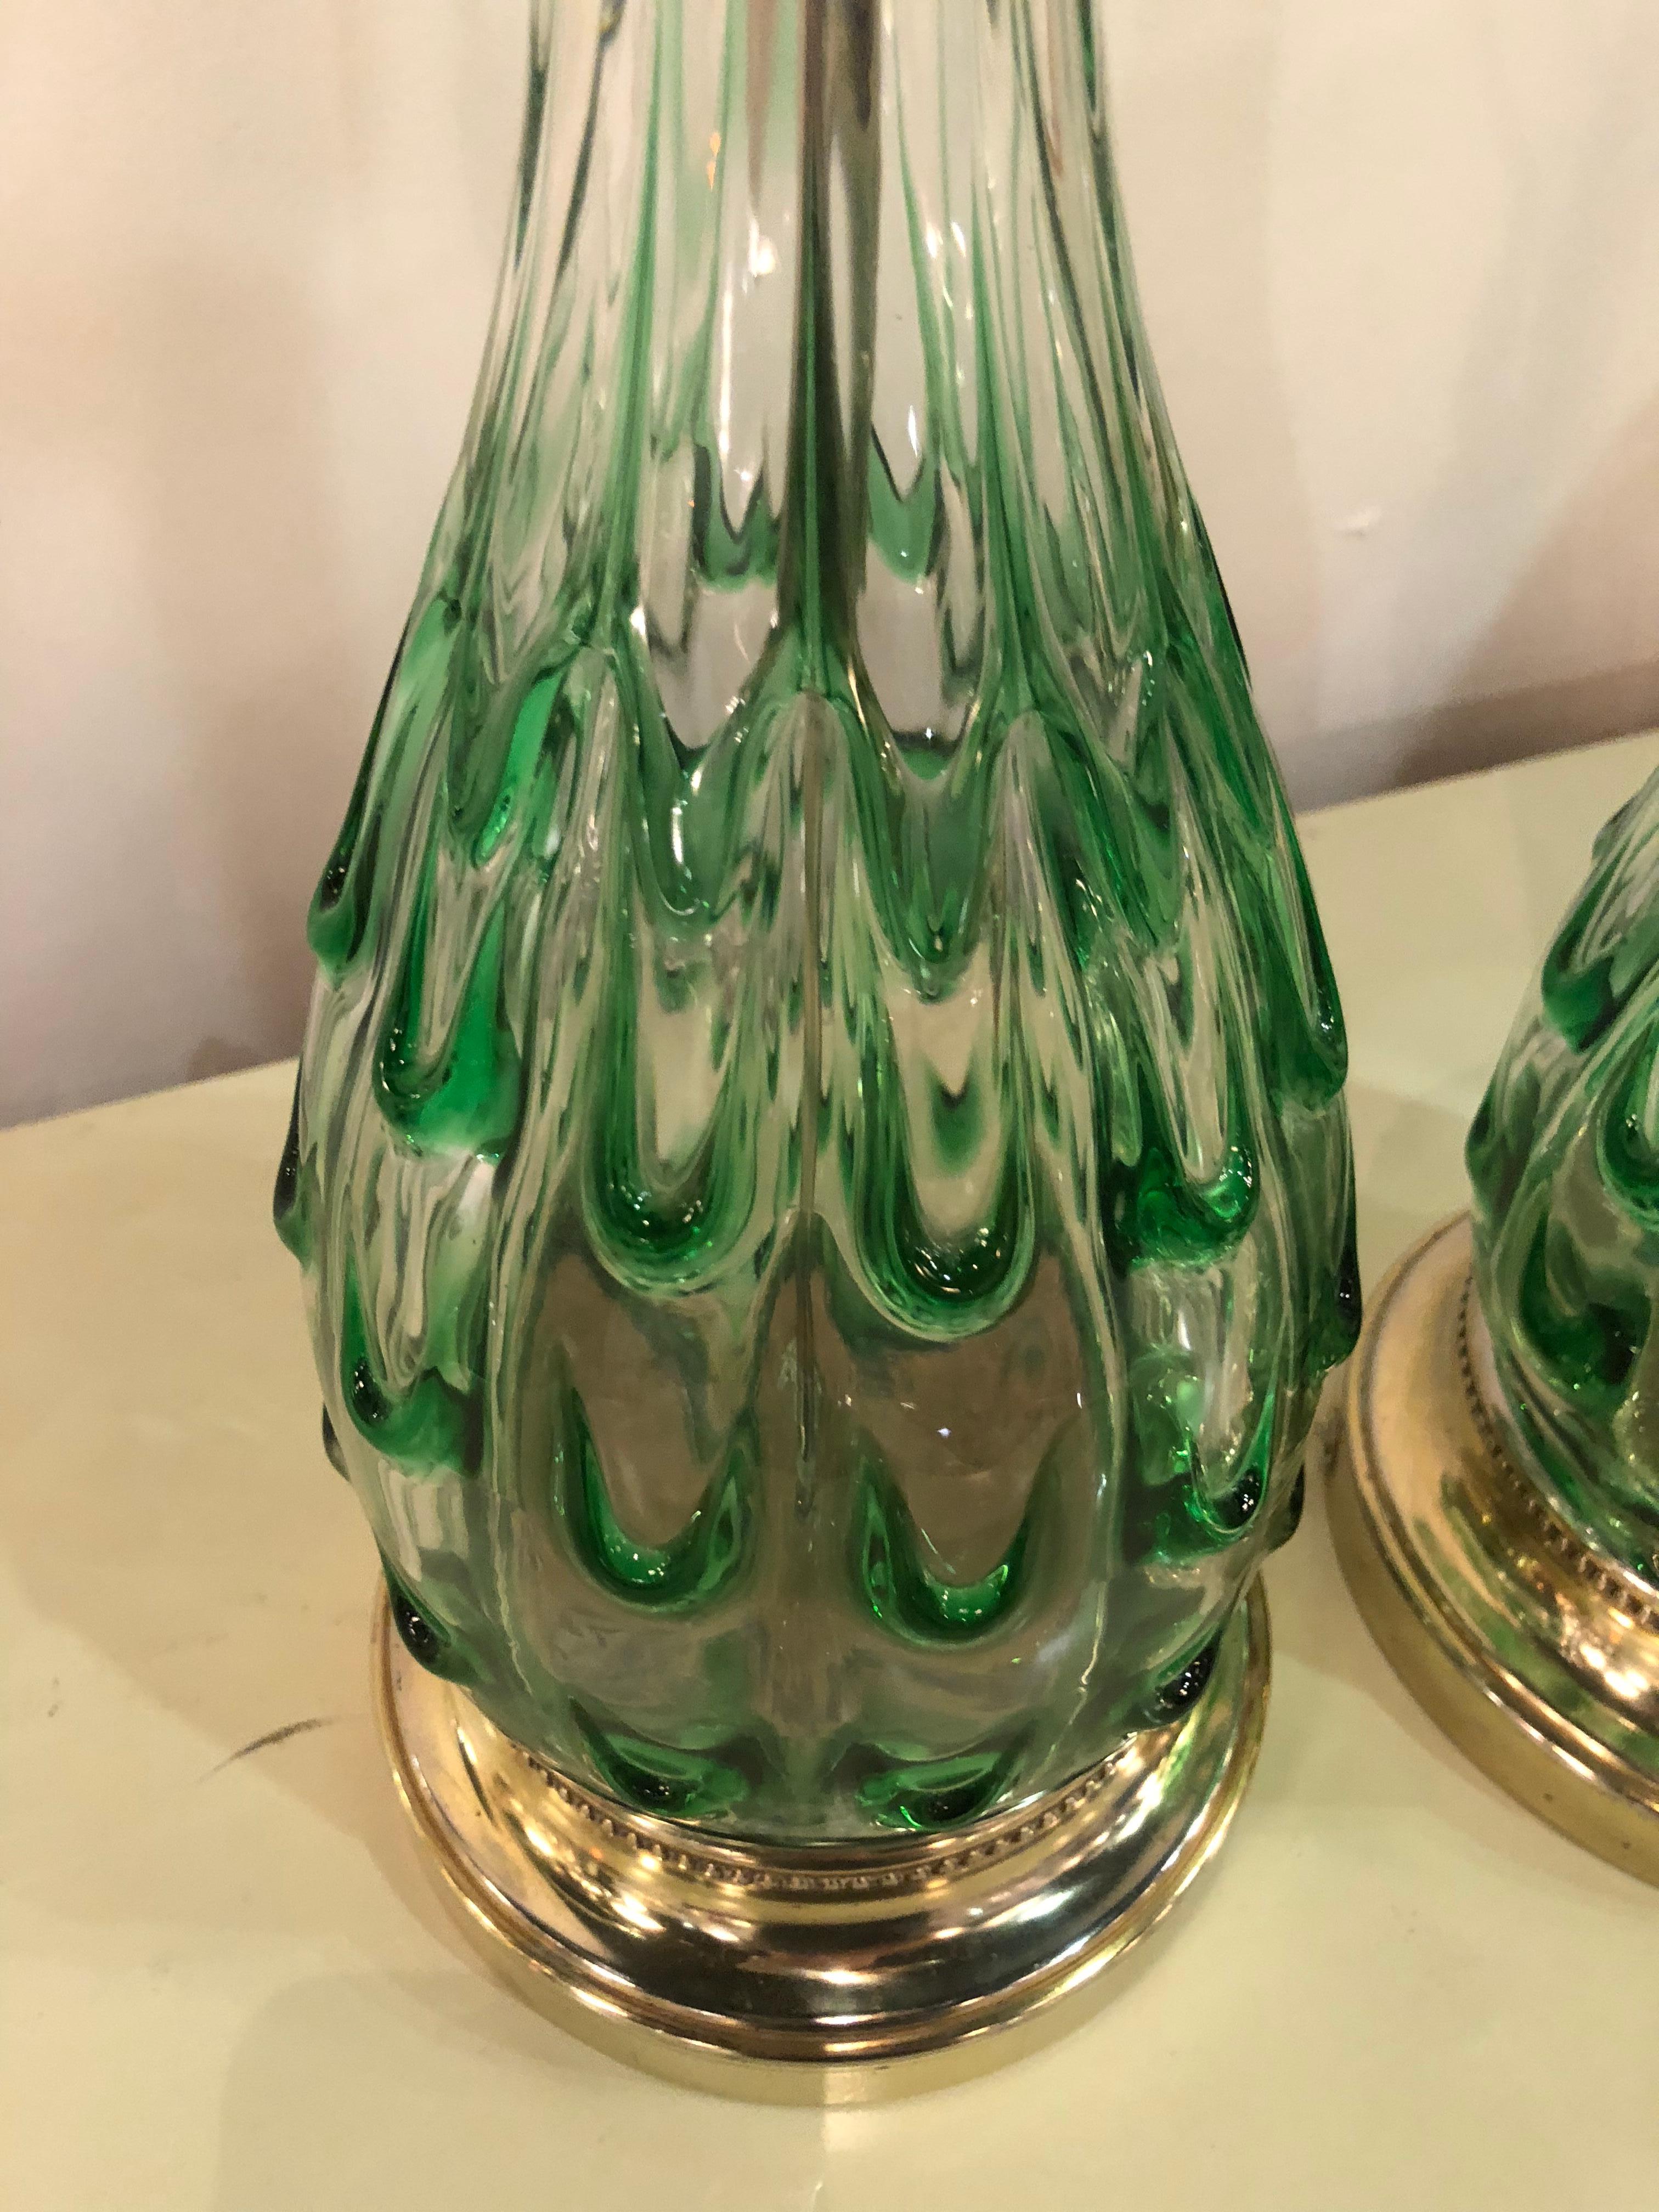 Pair of vintage green swirl glass Murano table lamps. These have been professionally rewired, new brass hardware, Lucite finials. The bases are original and have been polished but do have some minor natural patina to them.
Measures: 35.75 tall to